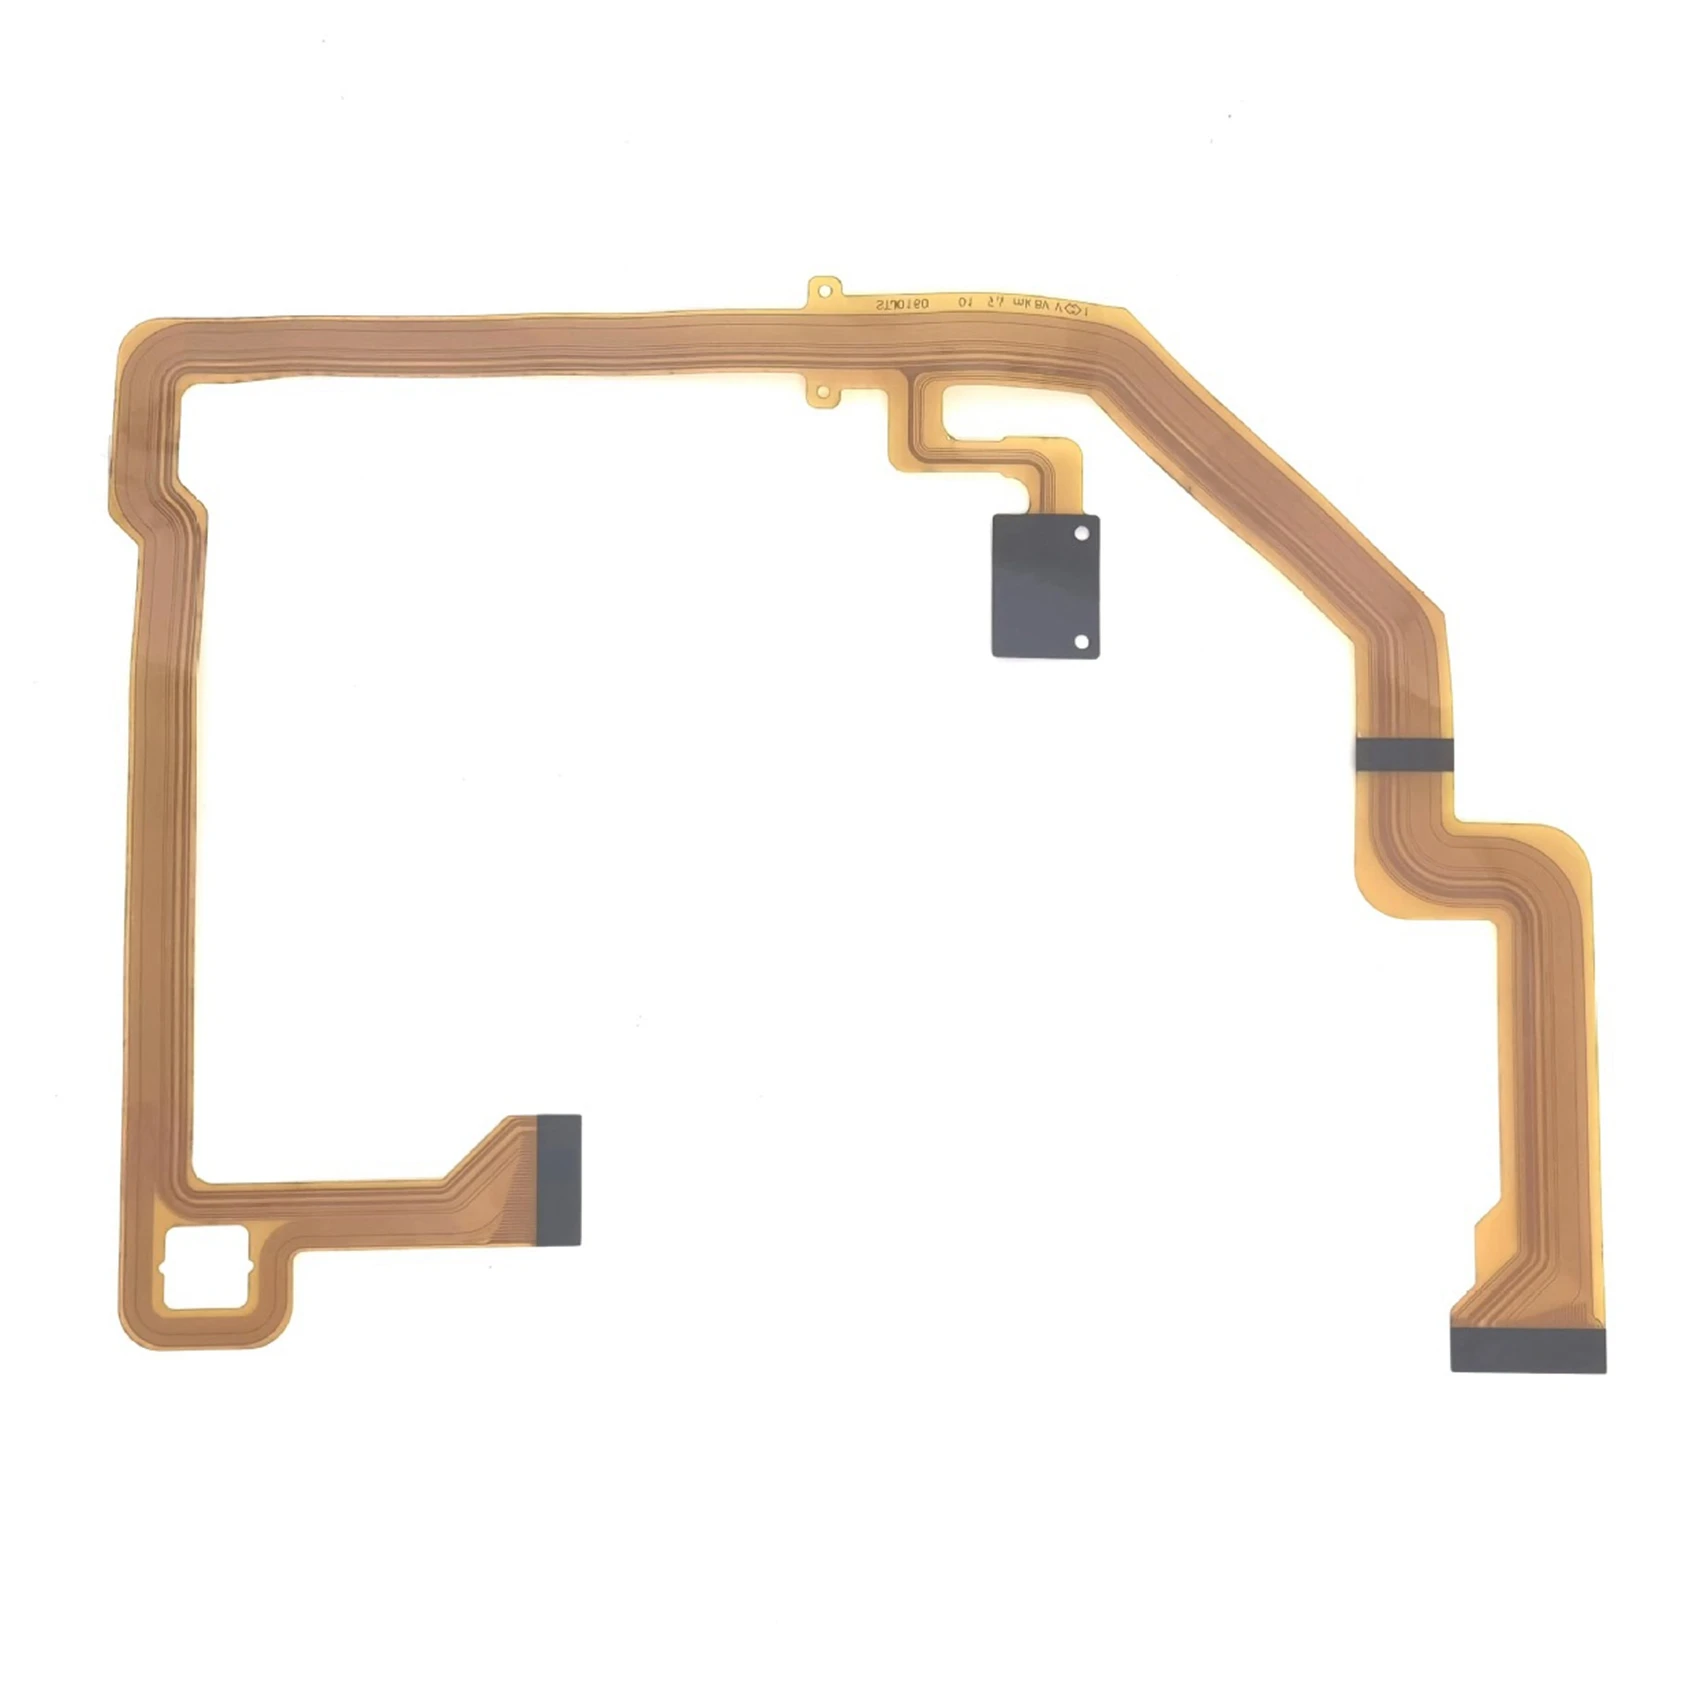 

1Pcs New for -G80 G81 G85D G7MK2 LCD Screen Flex Cable Screen Rotation Axis Cable Camera Replacement Part